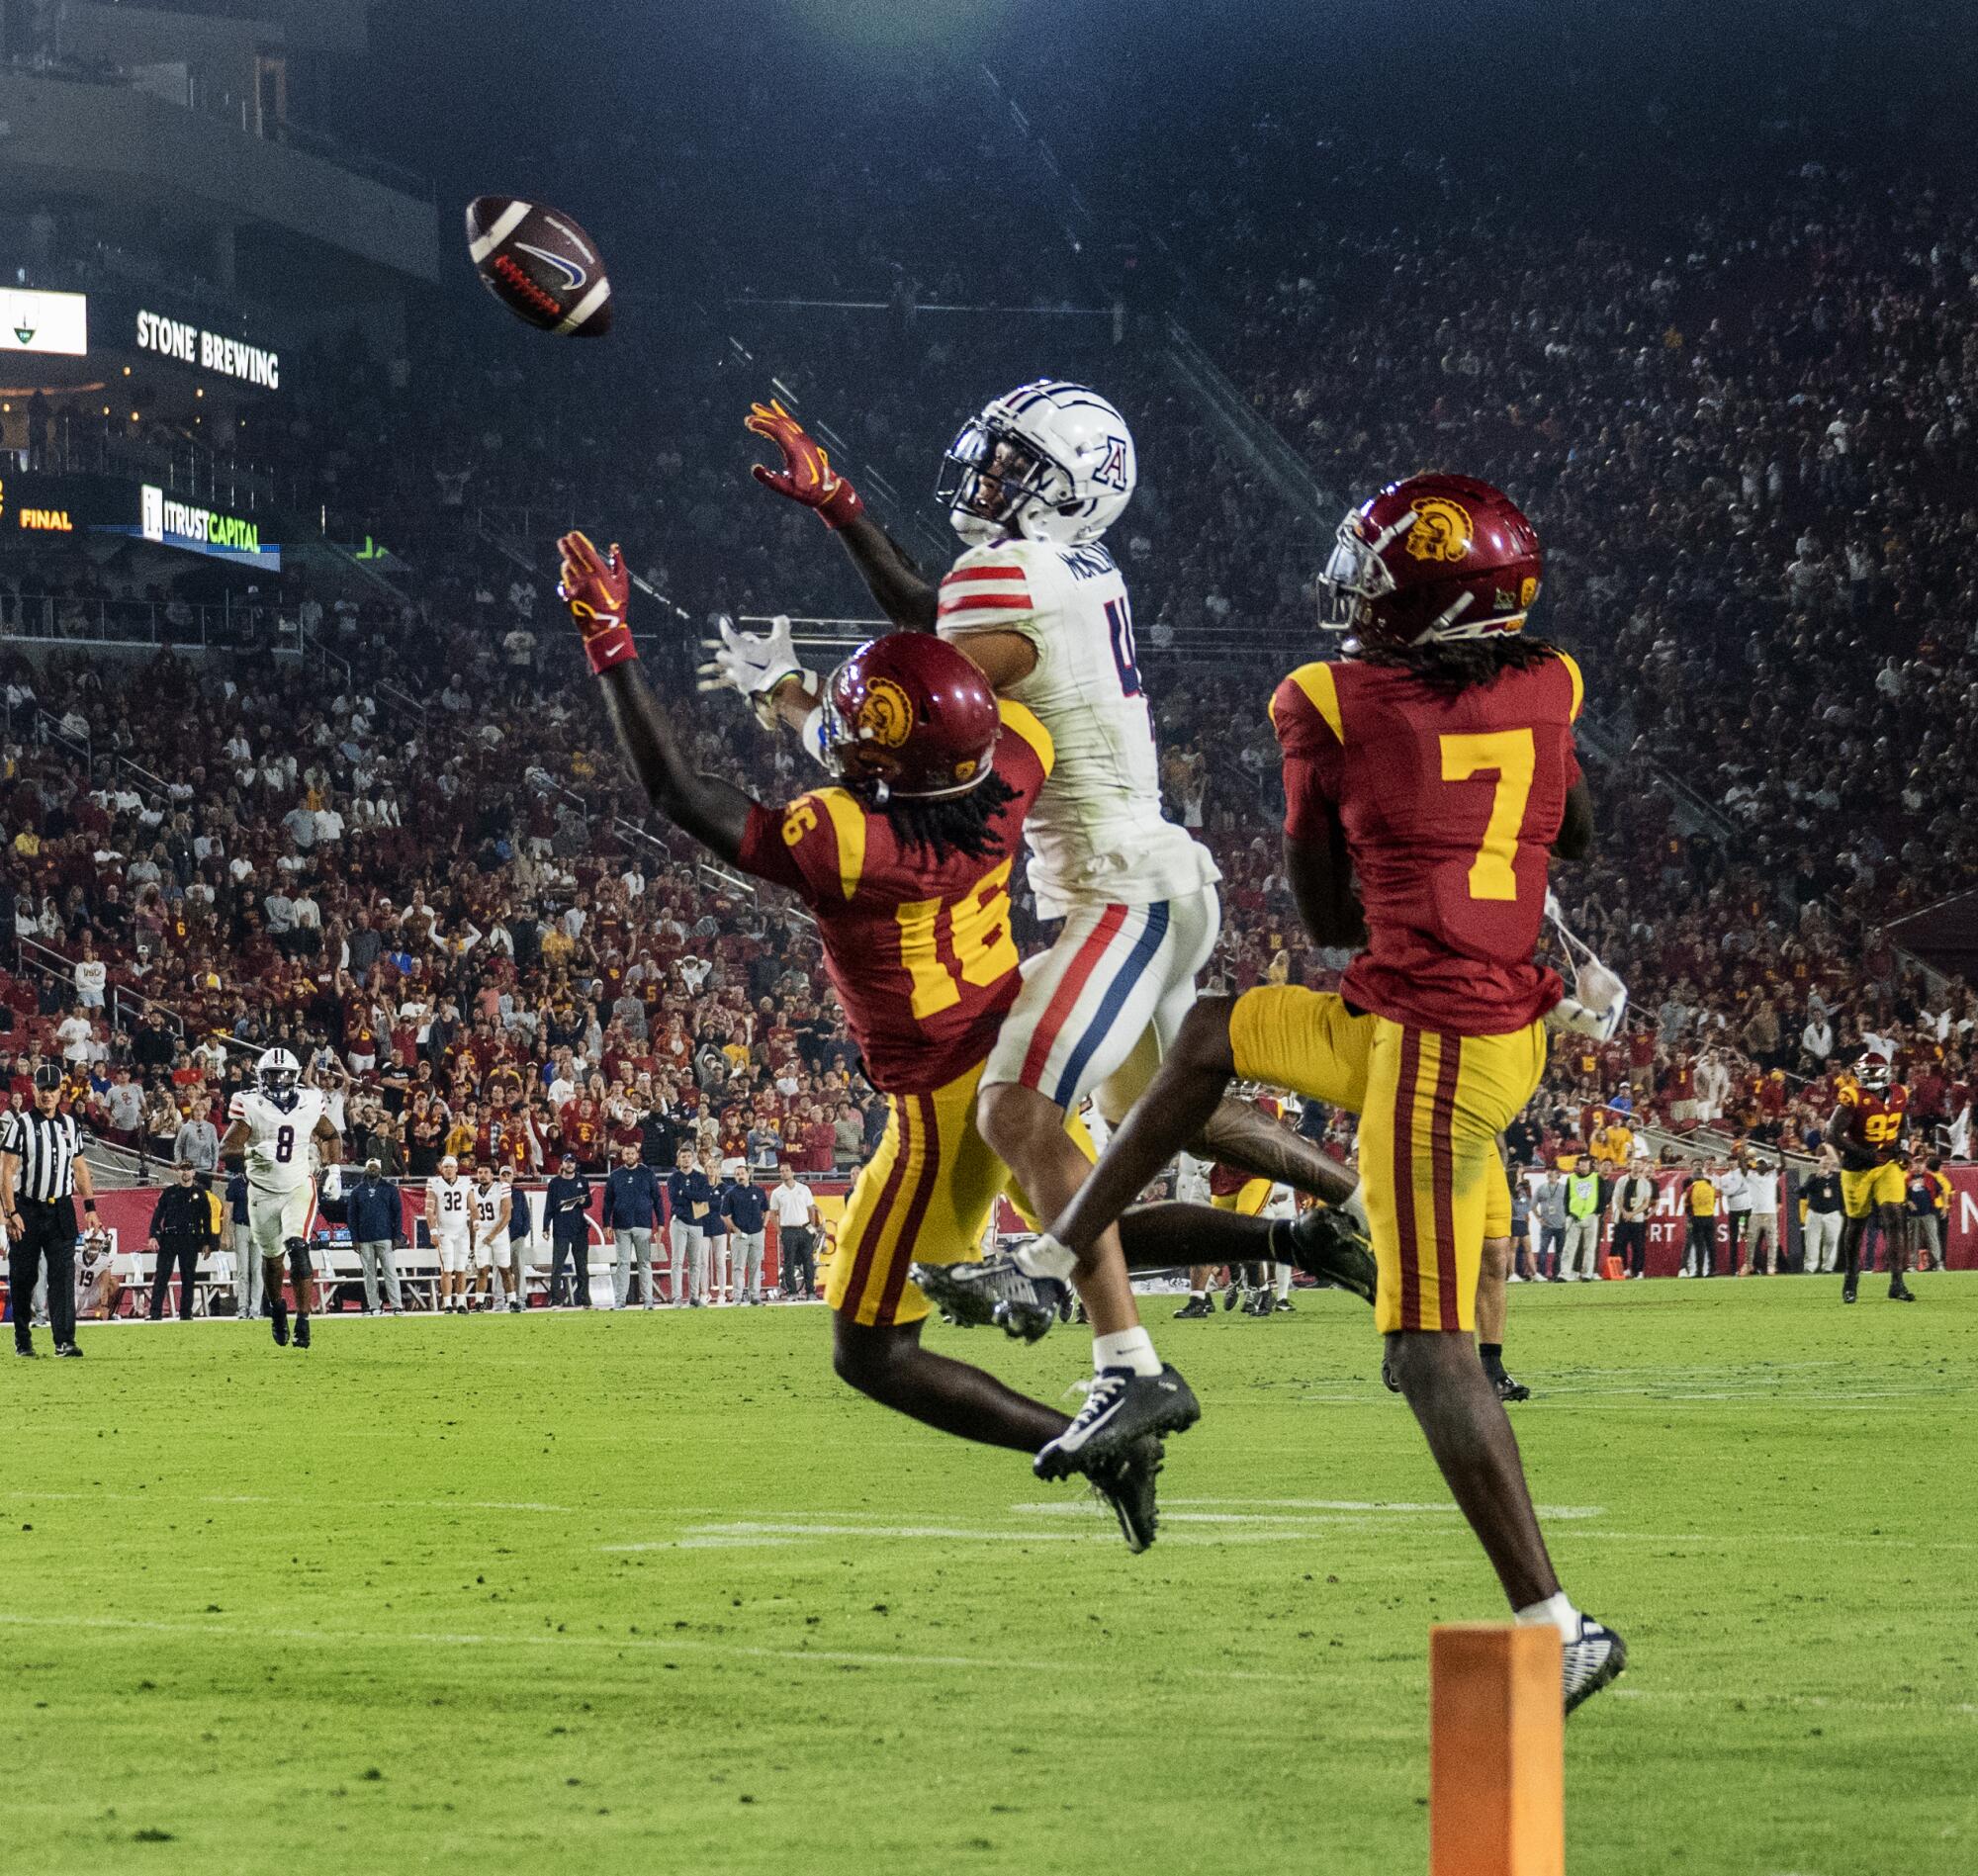 Trojans cornerback Prophet Brown and Calen Bullock leap and break up a pass during a play.